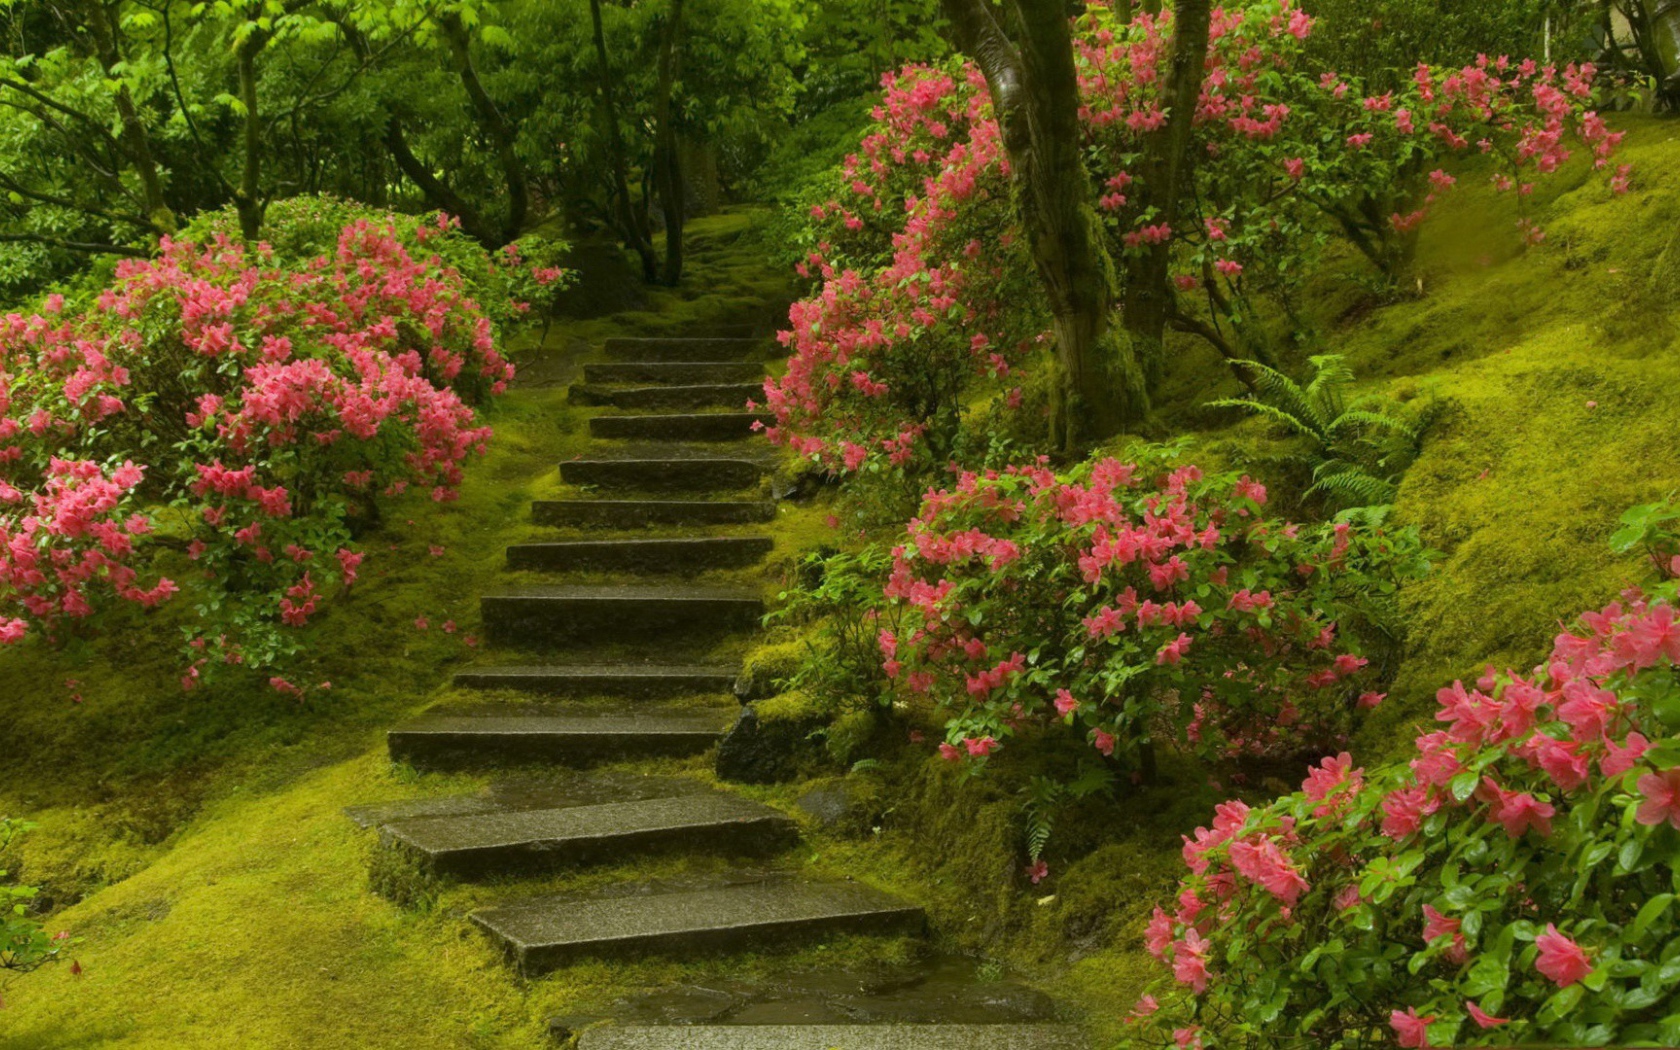 Stone stairs in the lush garden